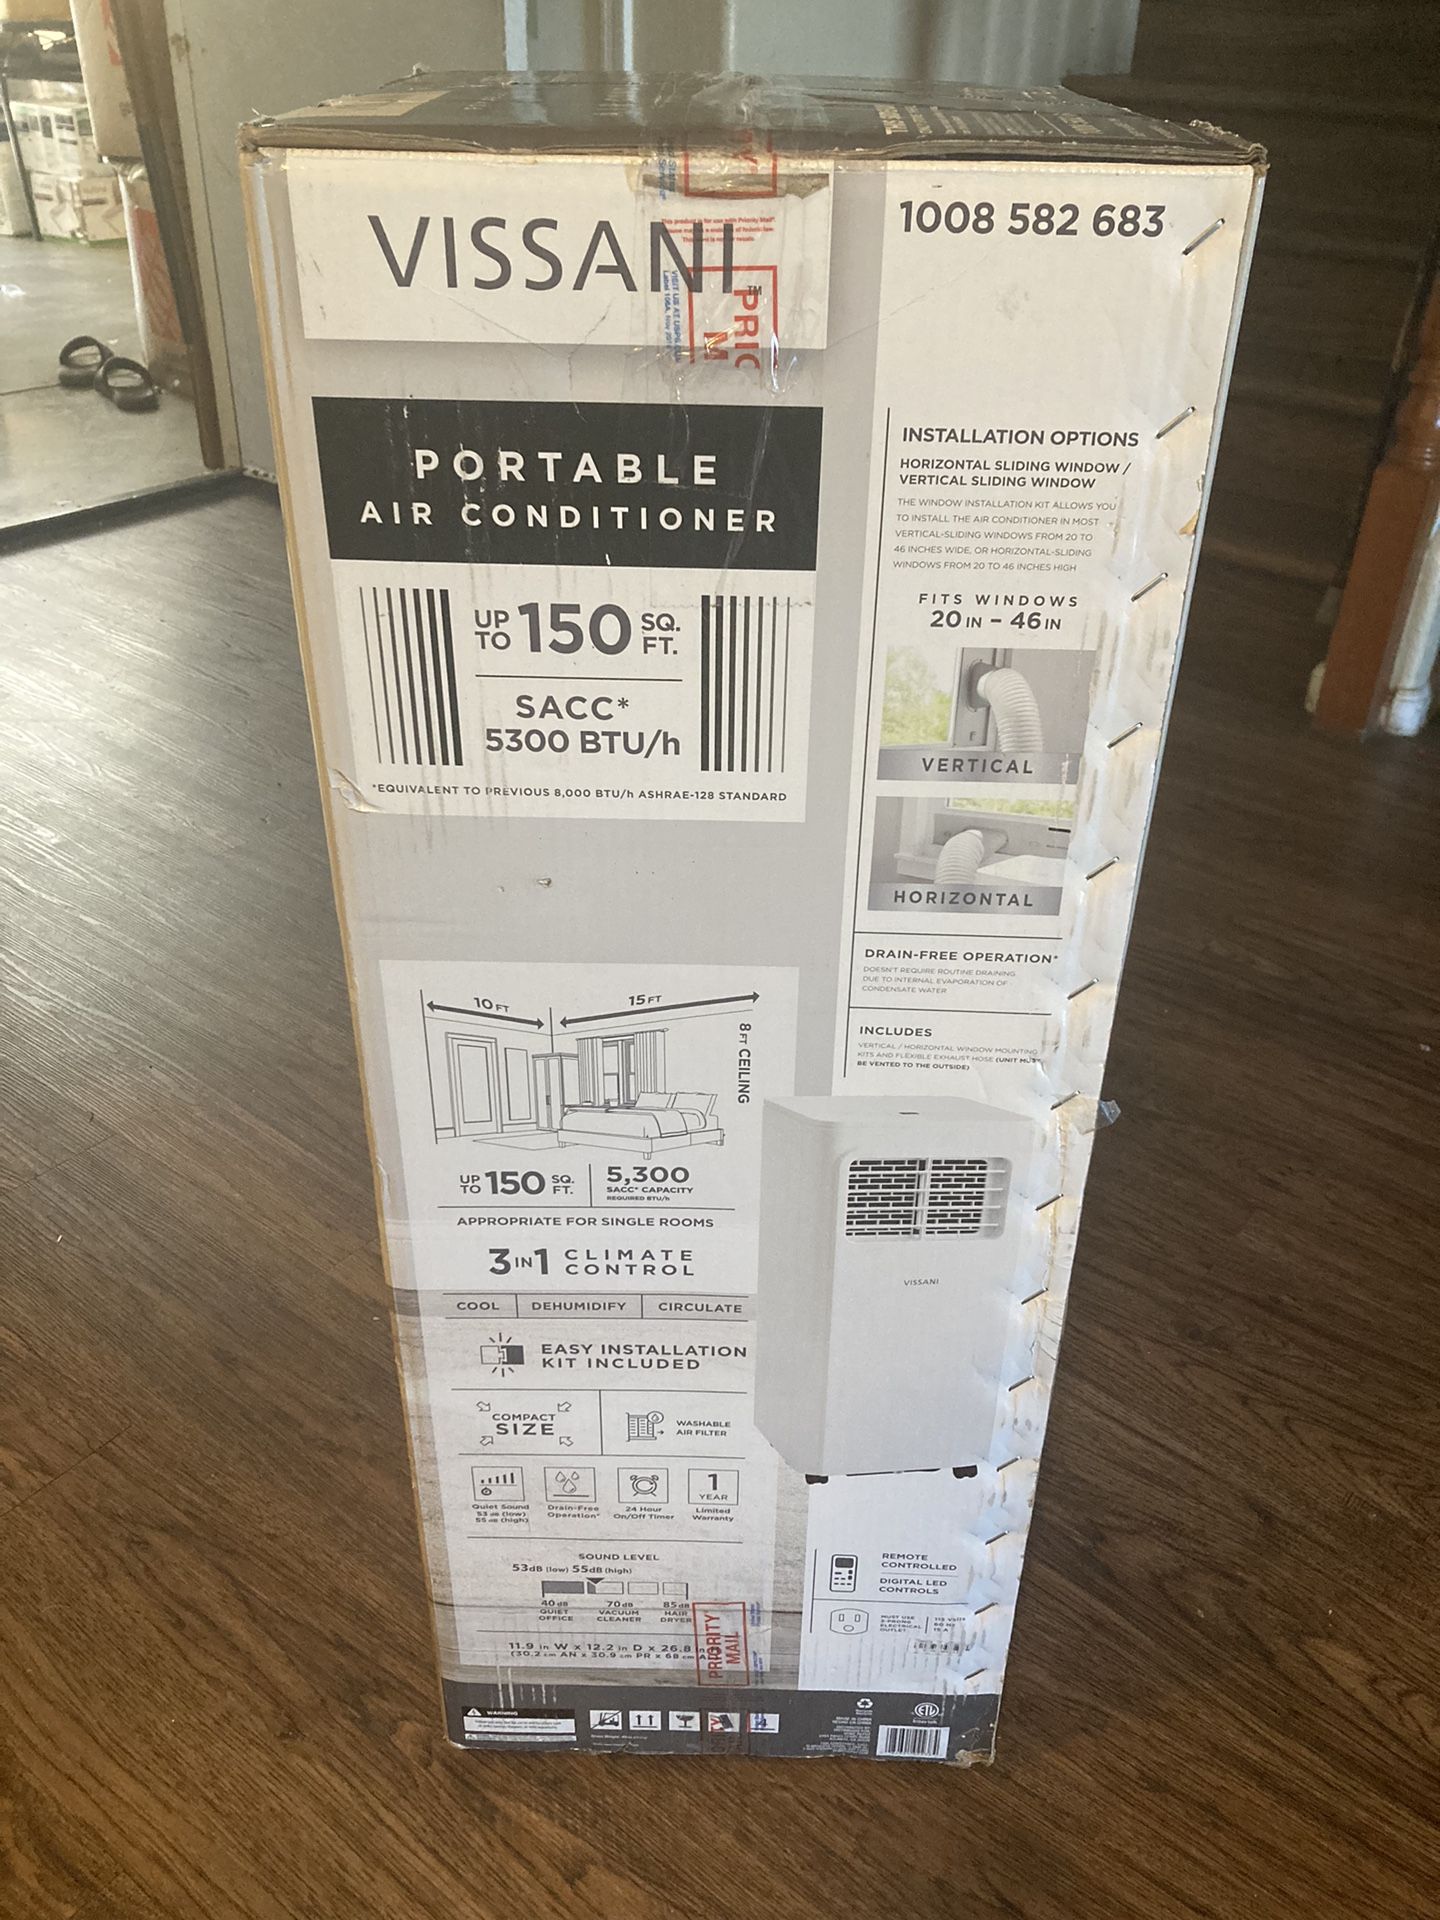 VISSANI 5,000 BTU Portable Air Conditioner for 150 sq. ft. Rooms with Dehumidifier Mode and Remote